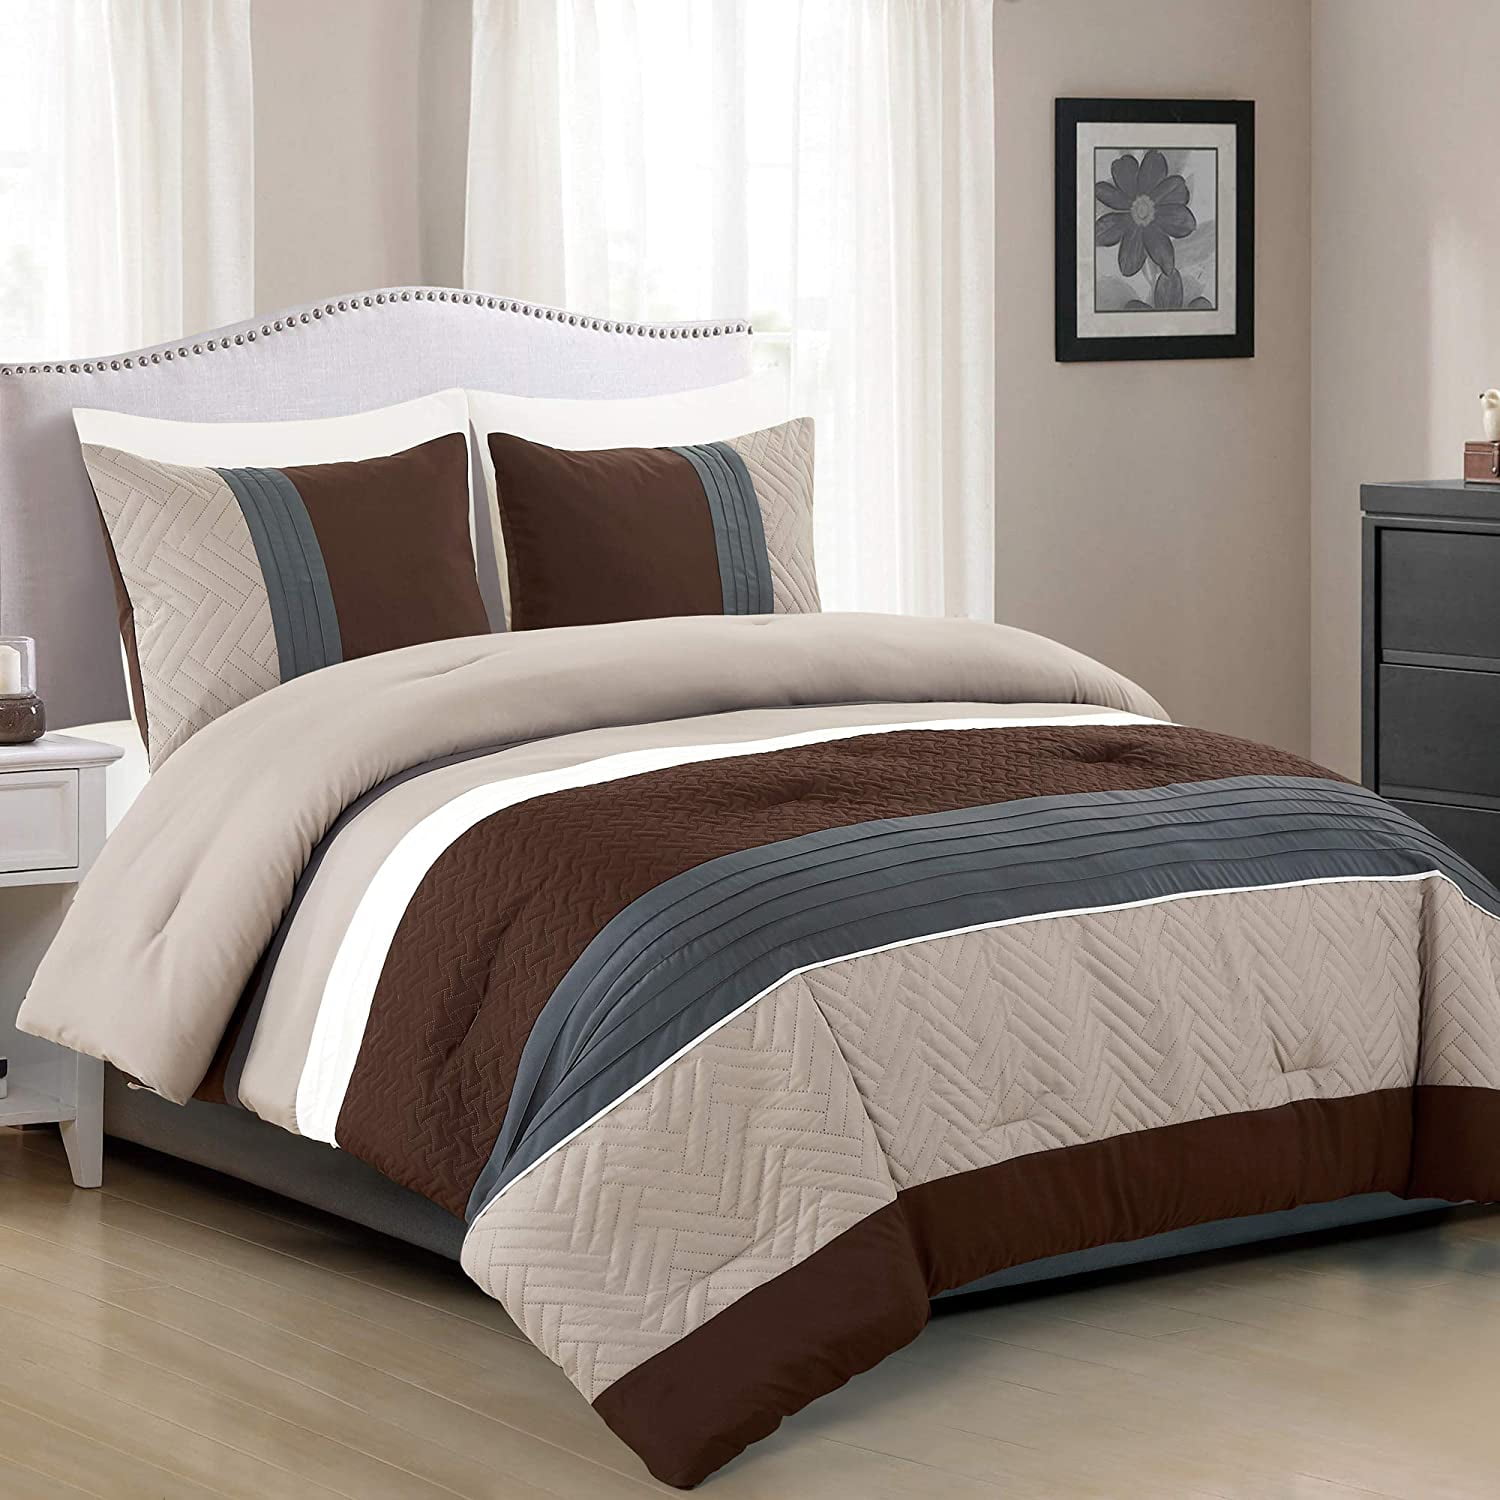 BEAUTIFUL ULTRA SOFT COZY MODERN BROWN TAUPE LOG CABIN RED BEIGE COMFORTER SET 